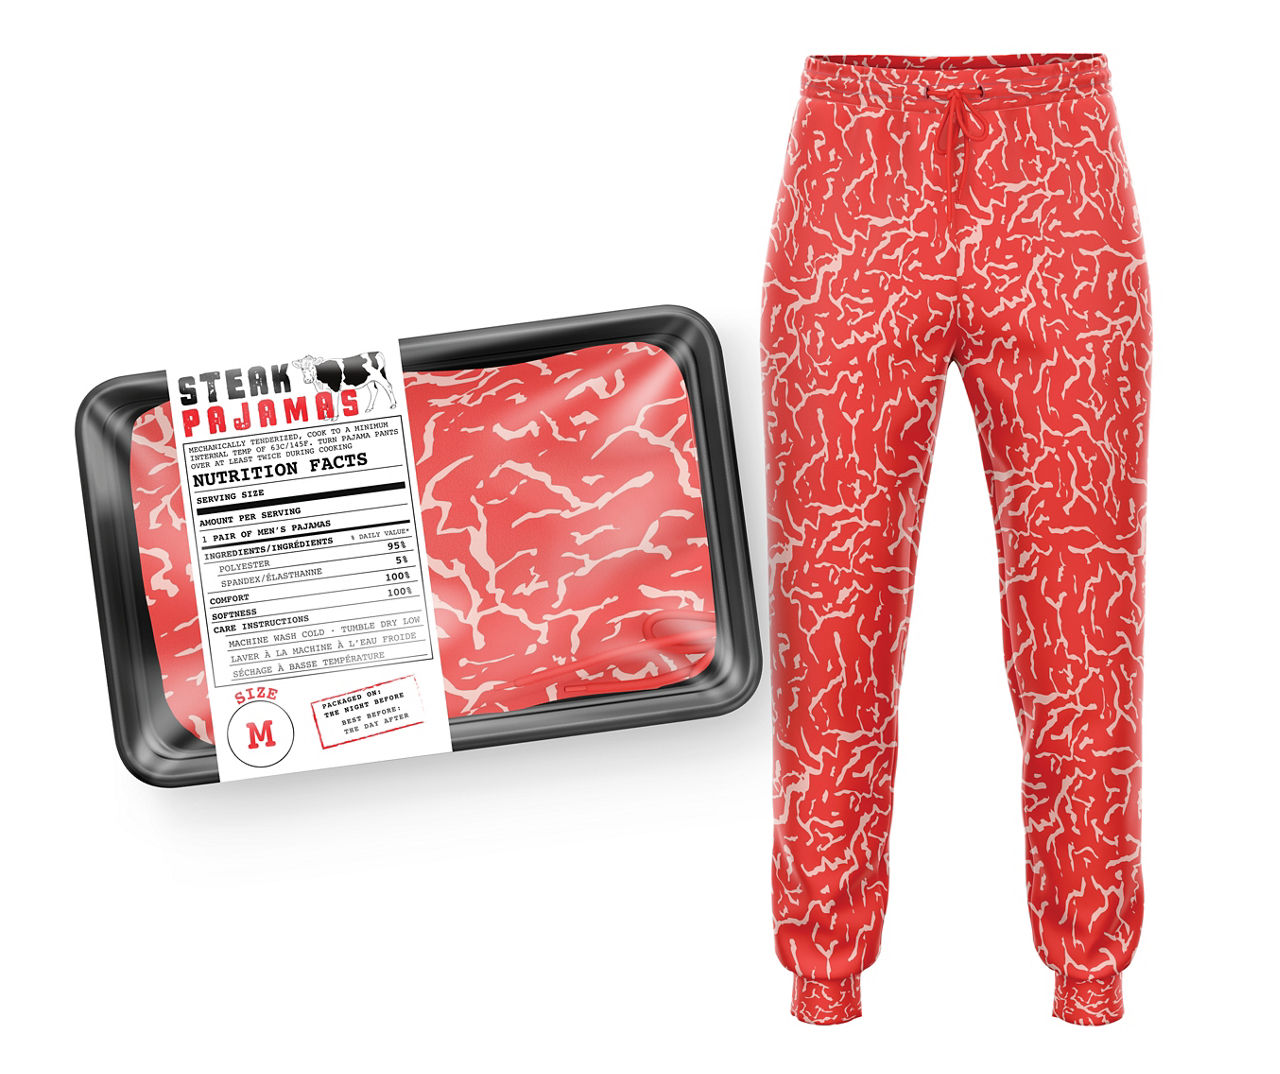 Men's Red & White Meat Novelty Lounge Pants